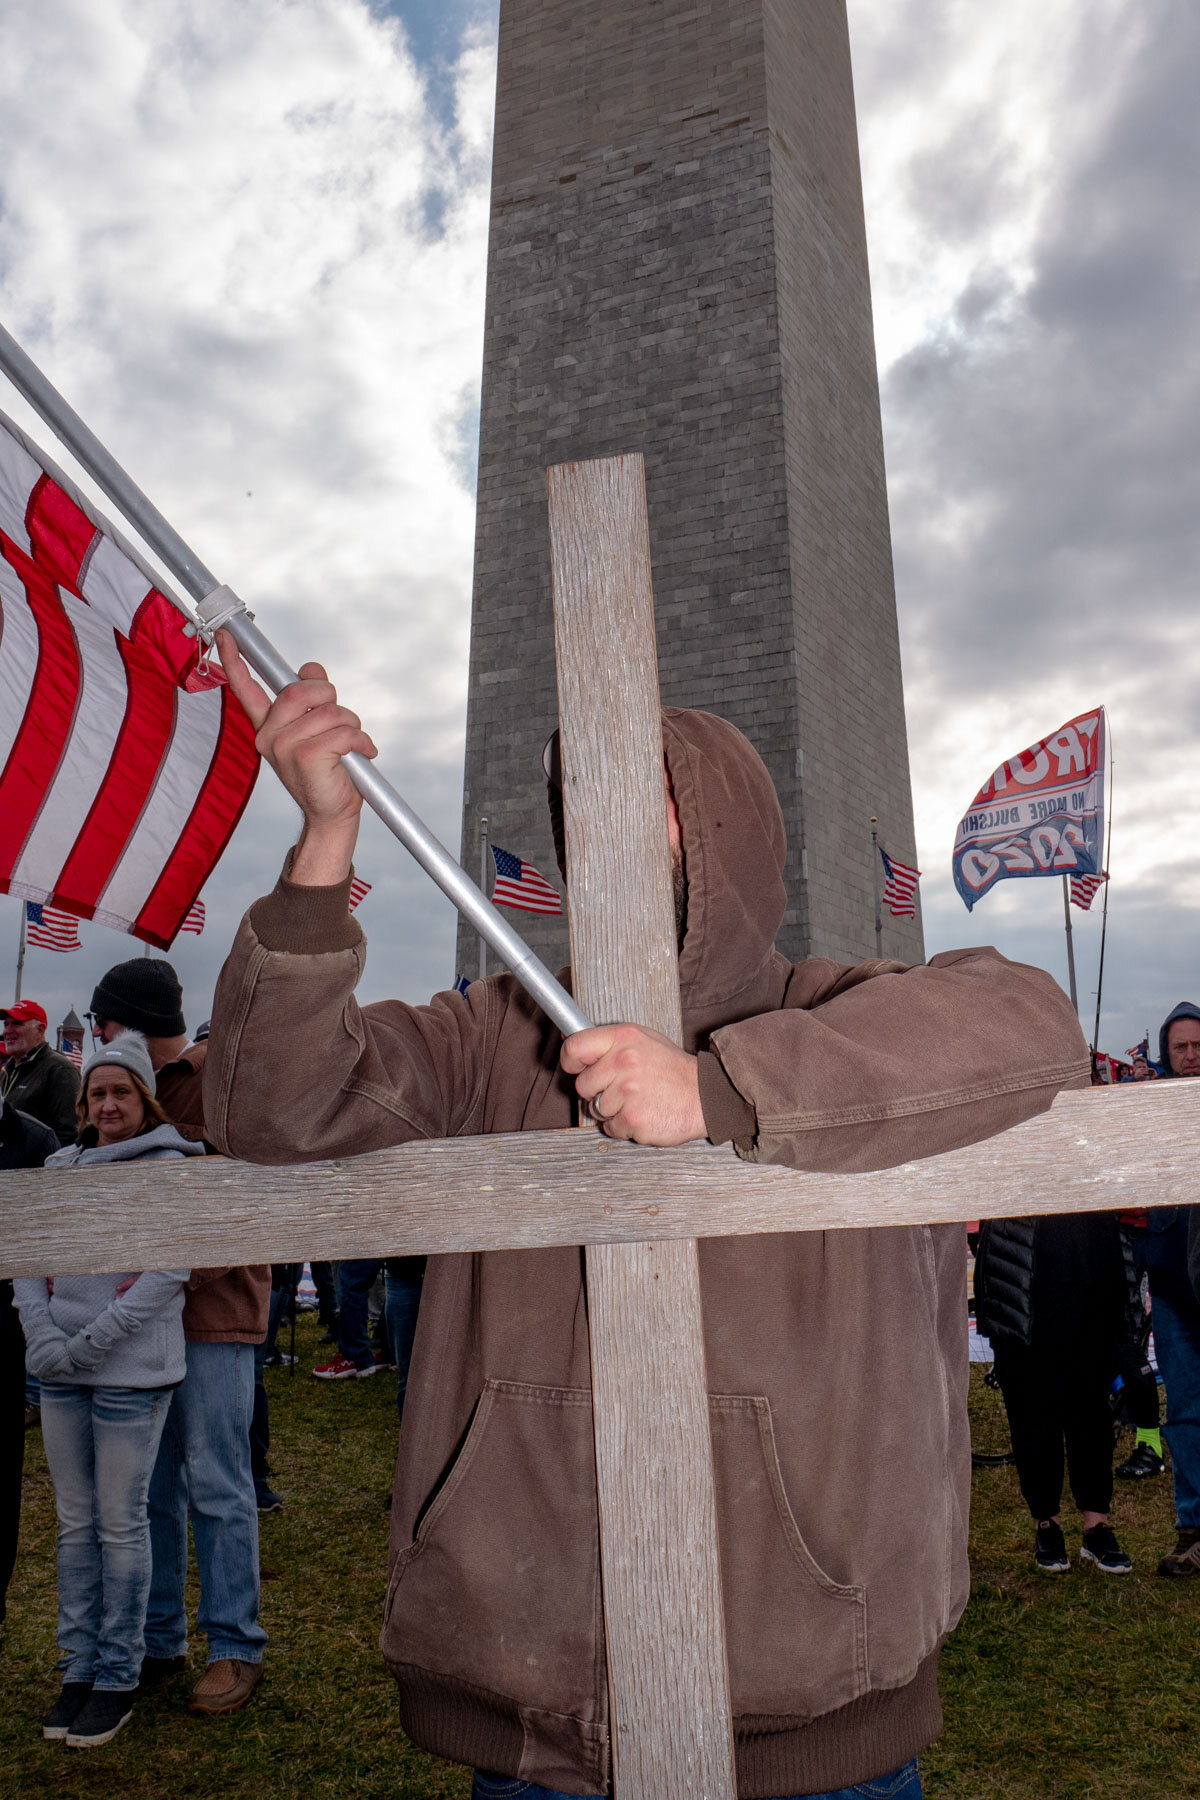  January 6th 2021 - A Trump supporter is holding a cross and an American flag in front of the Washington Monument during the last Trump rally in front of the White House that led to the Storming of the Capitol on January 6th. 